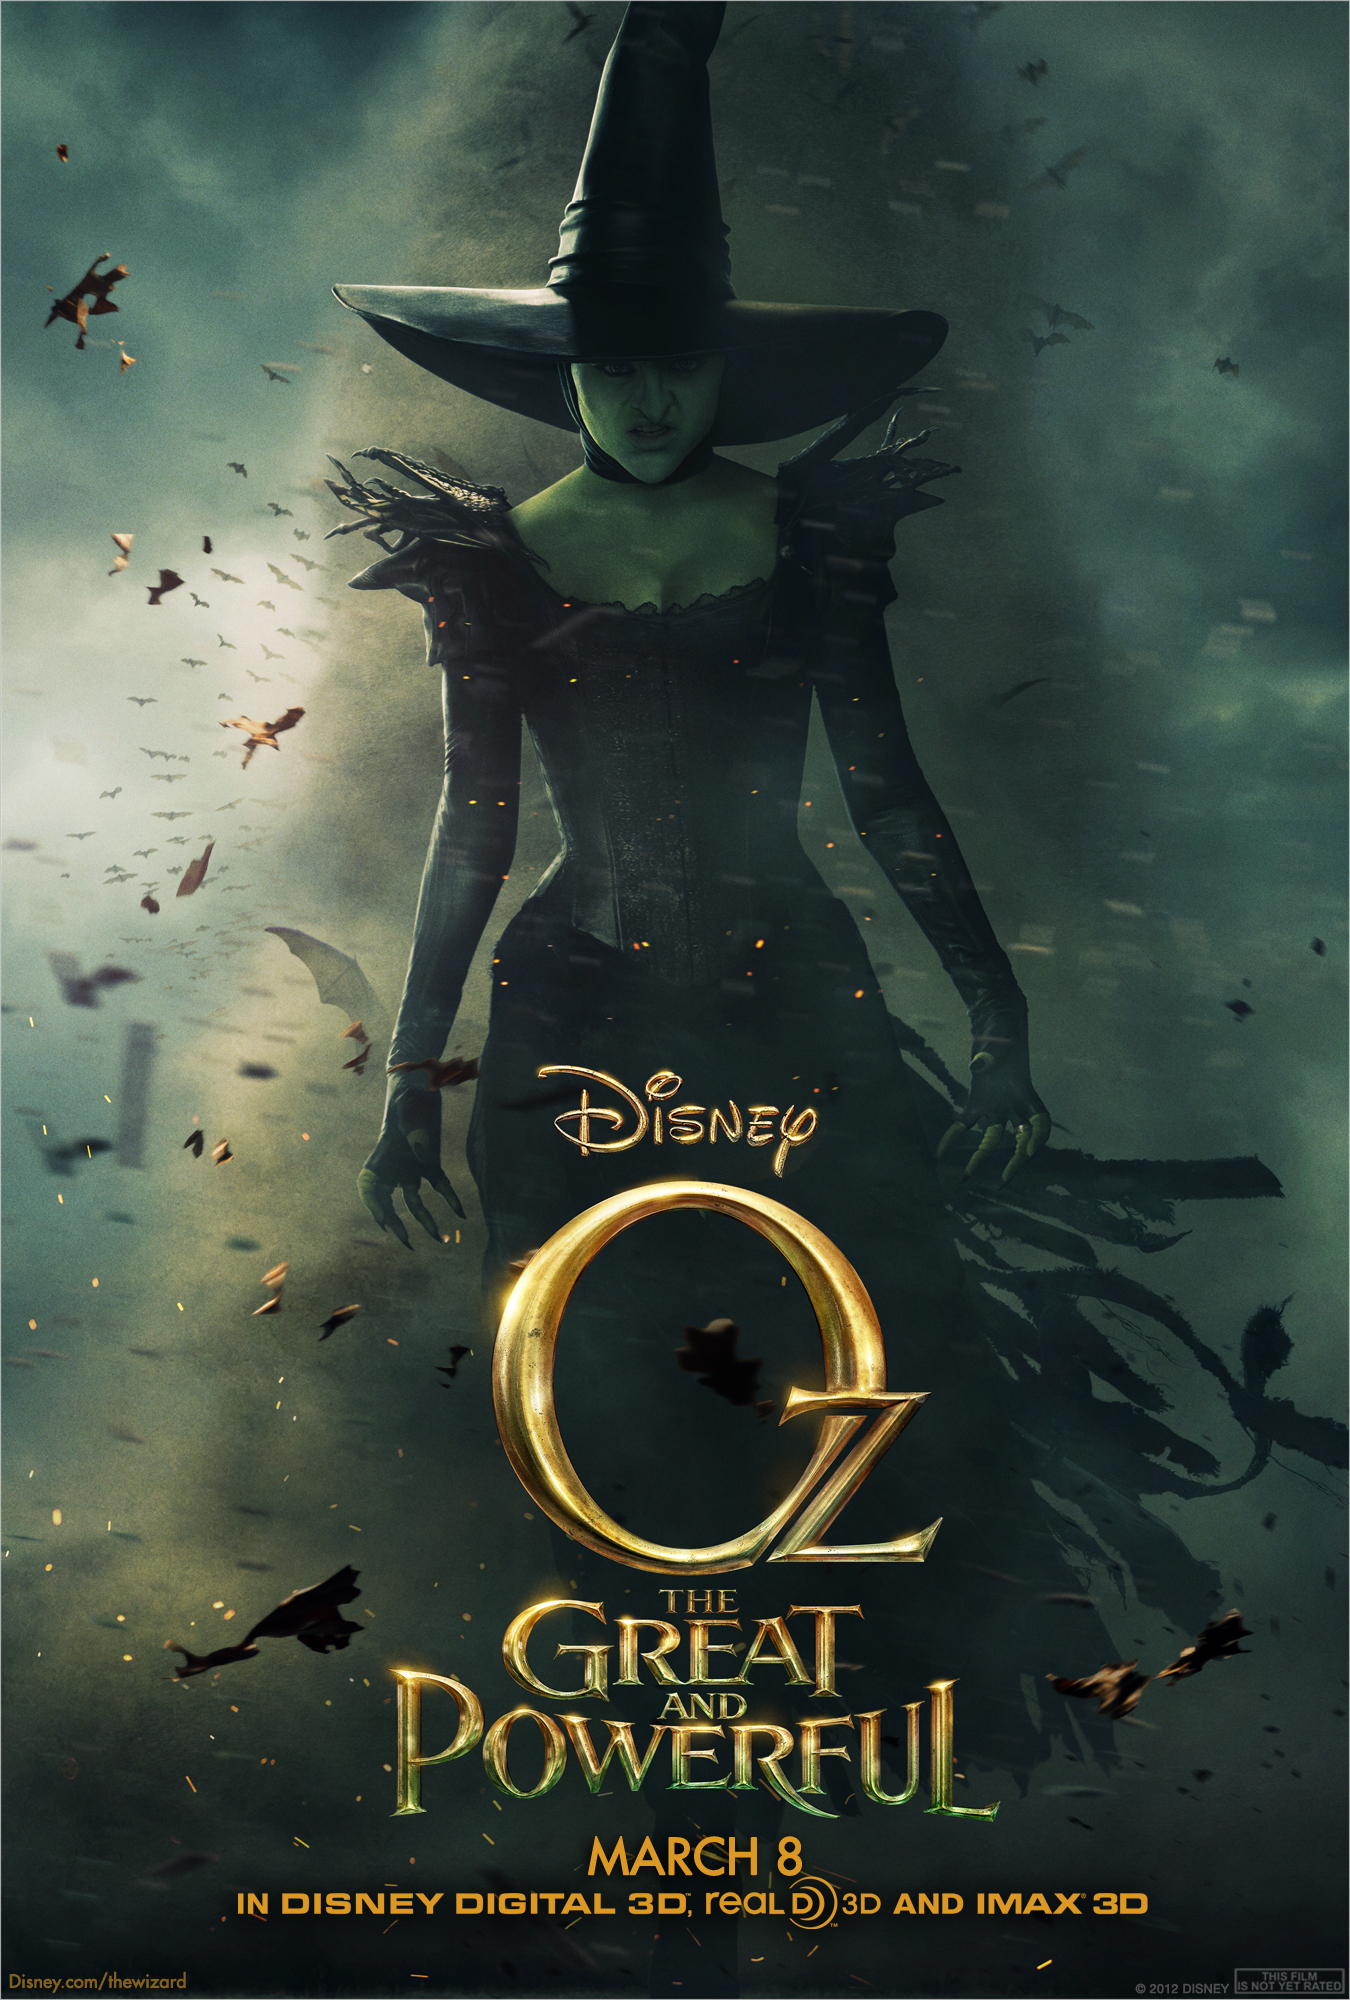 Oz the Great and Powerful - Movie Poster #2 (Original)